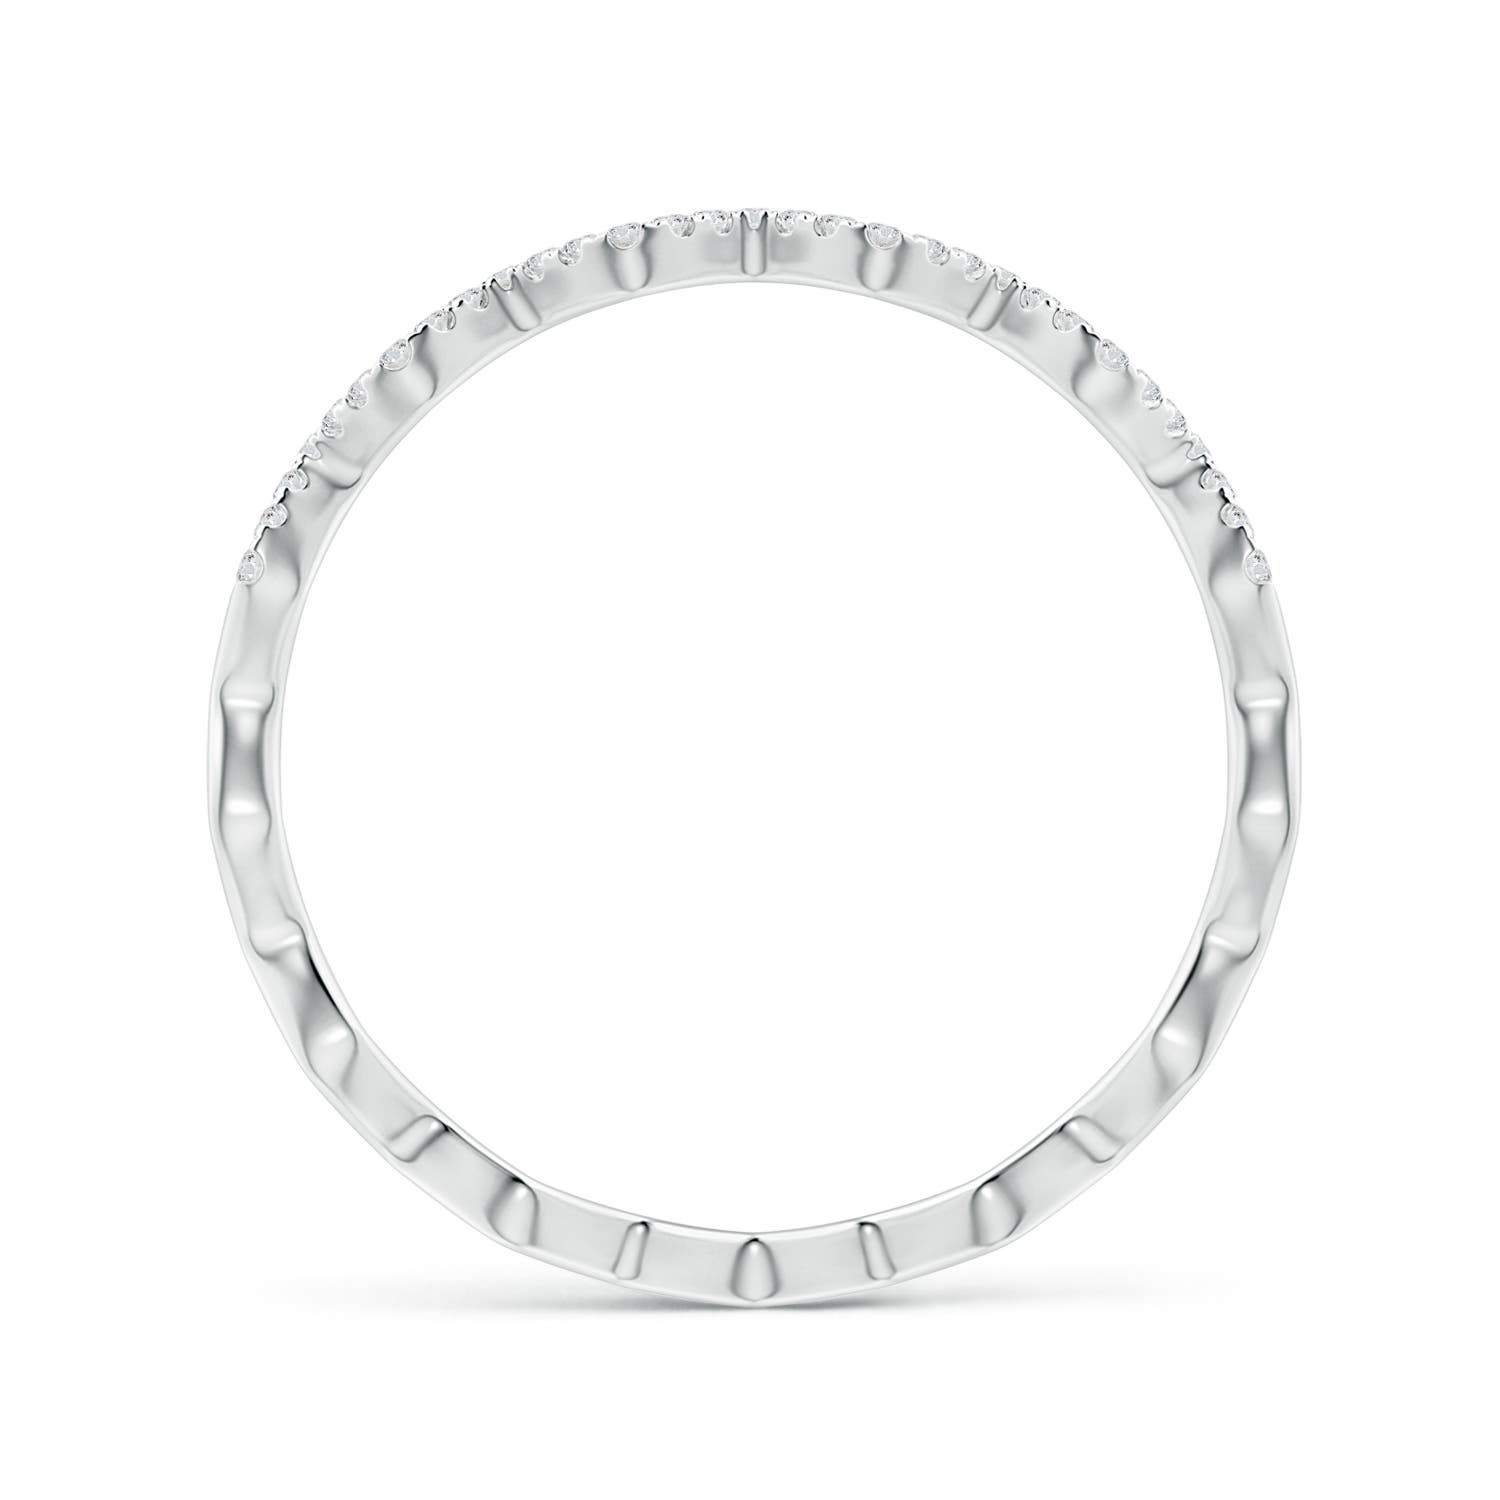 H, SI2 / 0.09 CT / 14 KT White Gold